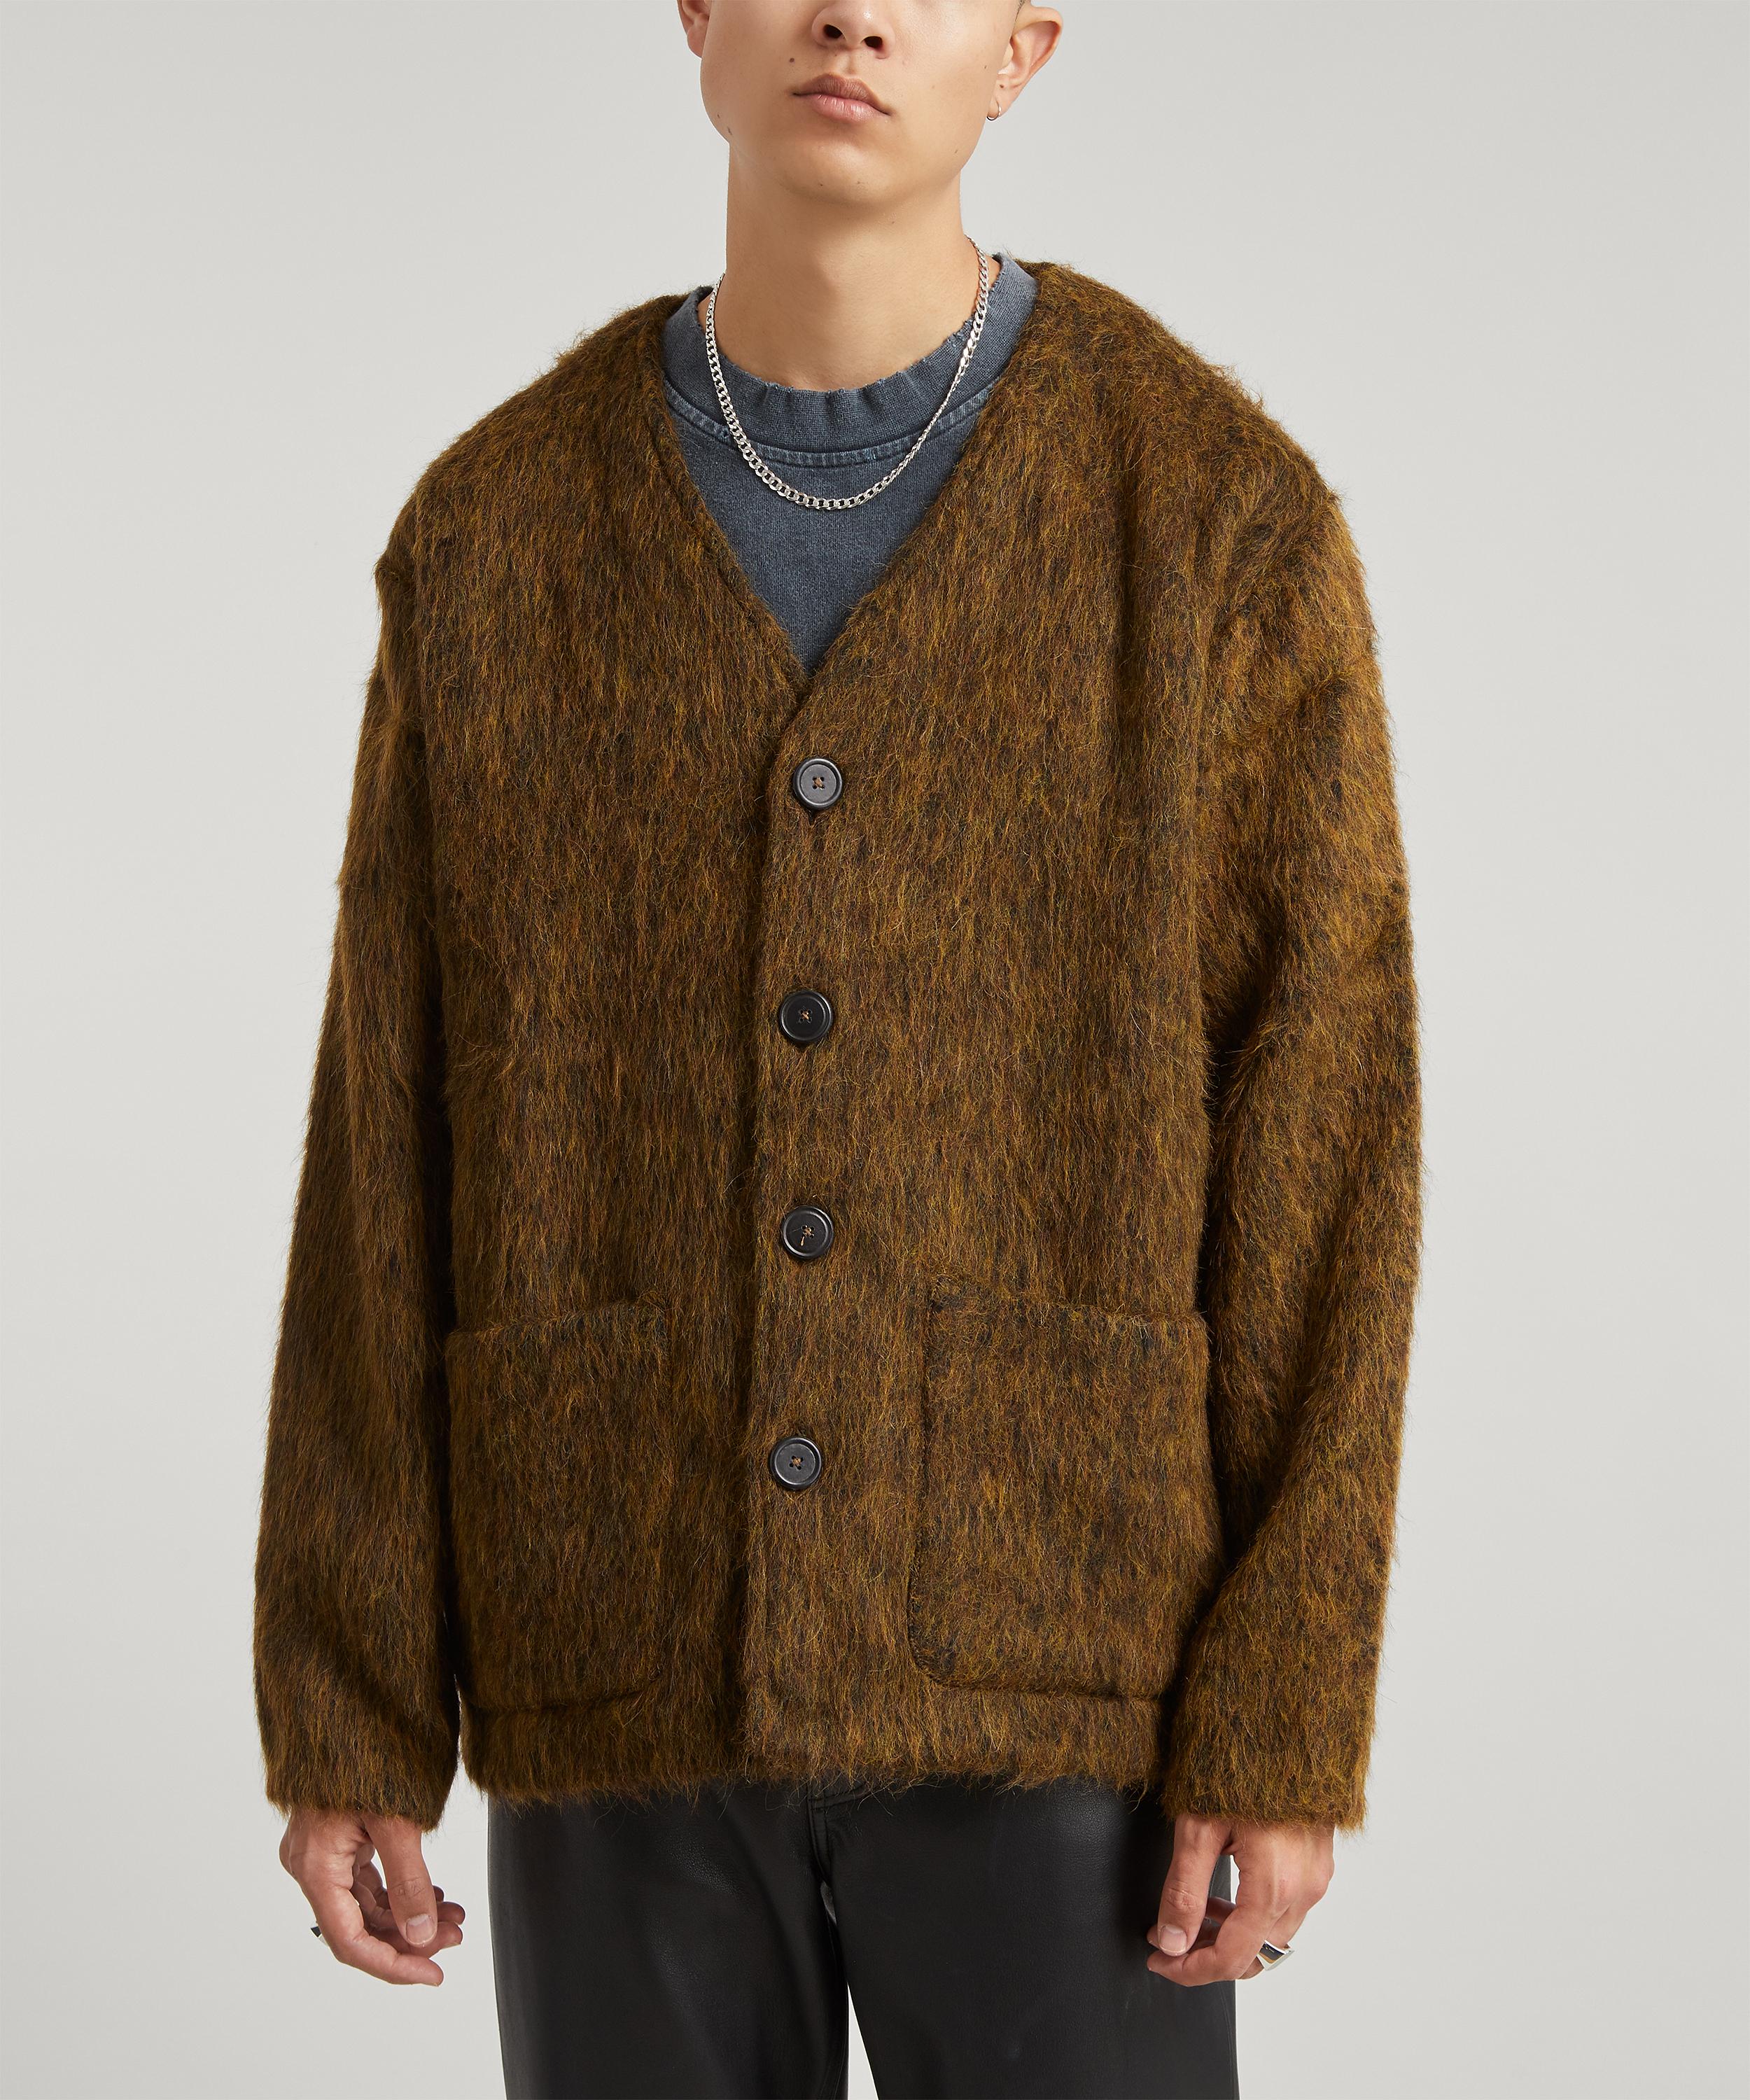 Ourlegacy mohair cardigan olive 44-